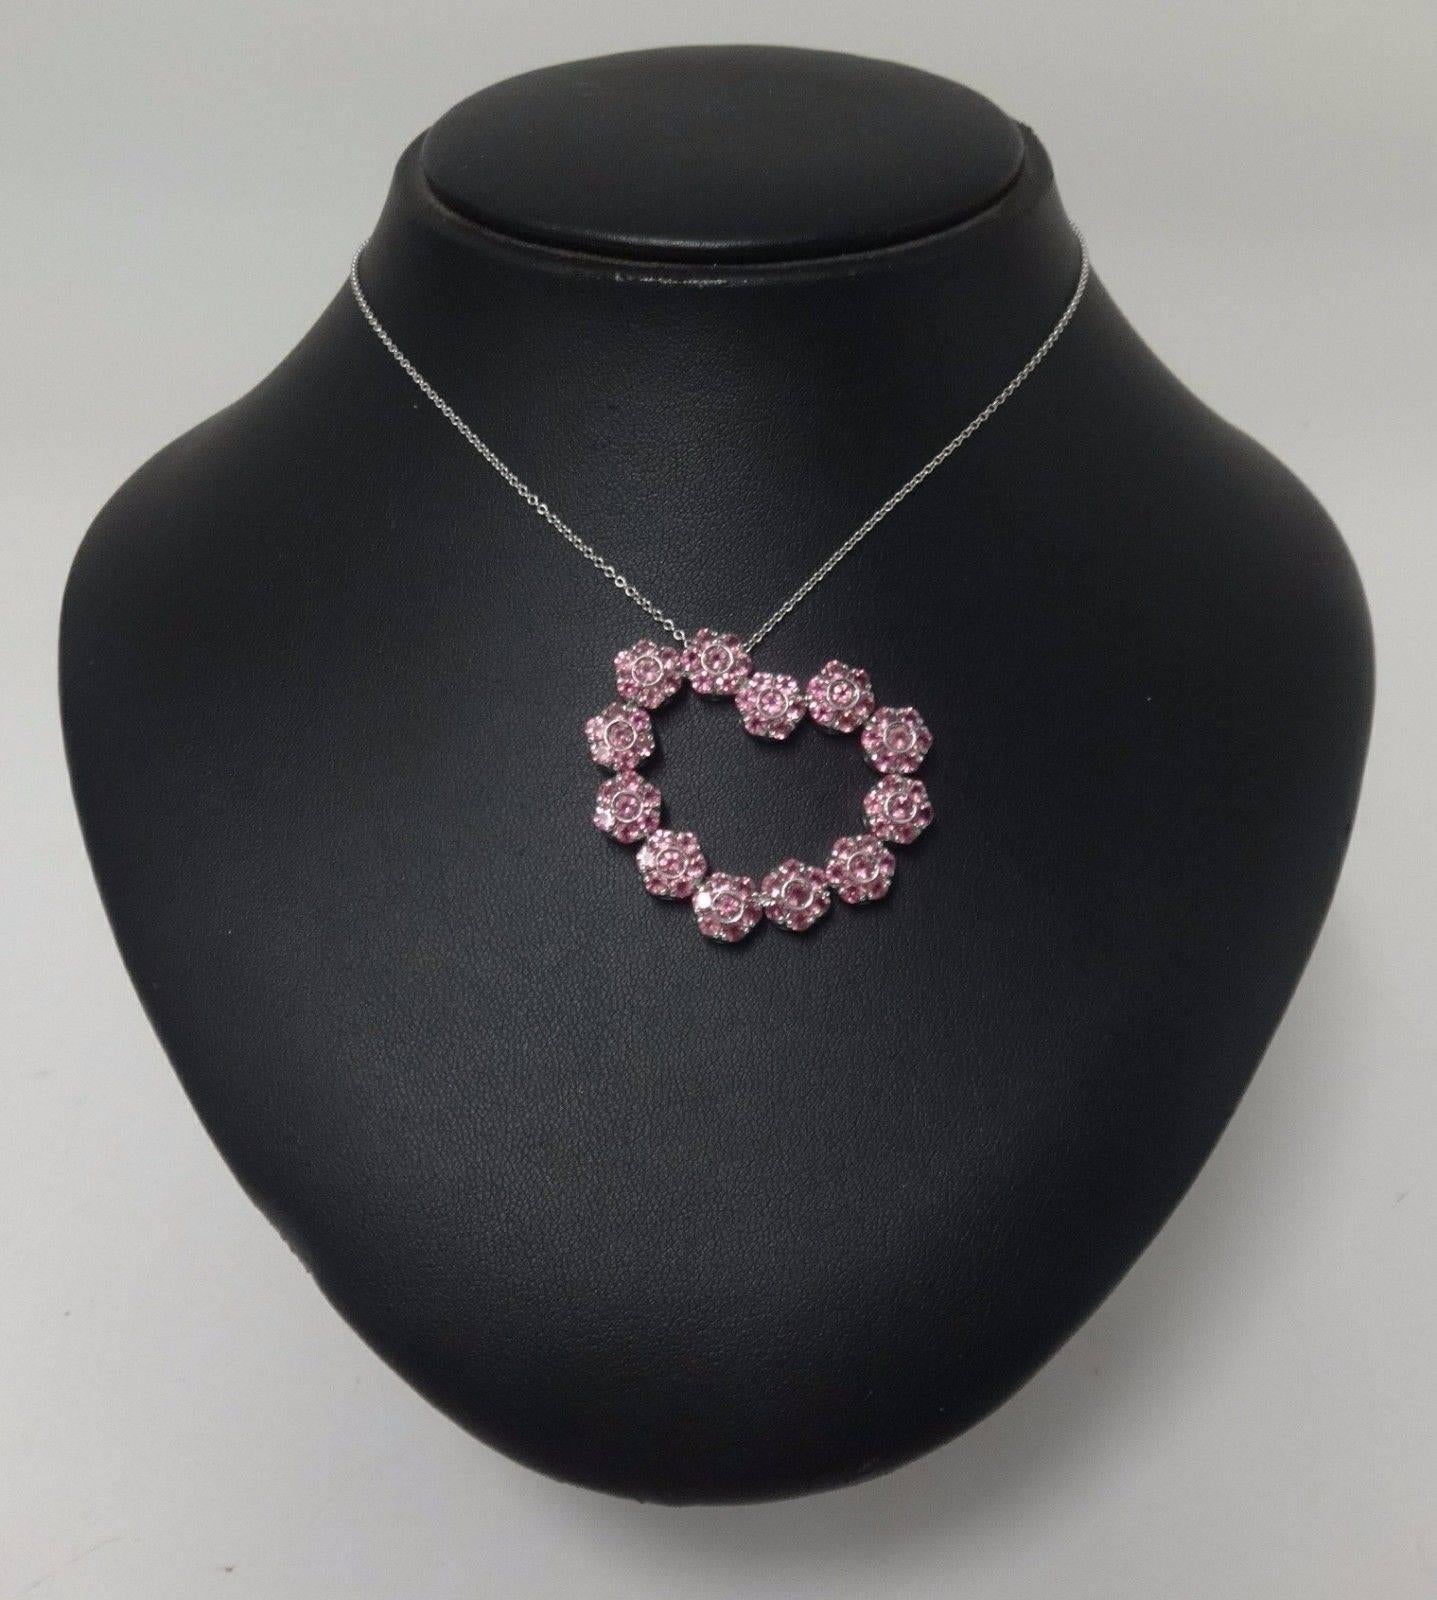 Totally amazing Pasquale Bruni 18 ct white gold and sapphire heart pendant.  The pendant is made of a series of little flowers which are all pink sapphires.  The weight is just over 17 grms.  This is a stunning pendant that would make a lovely gift